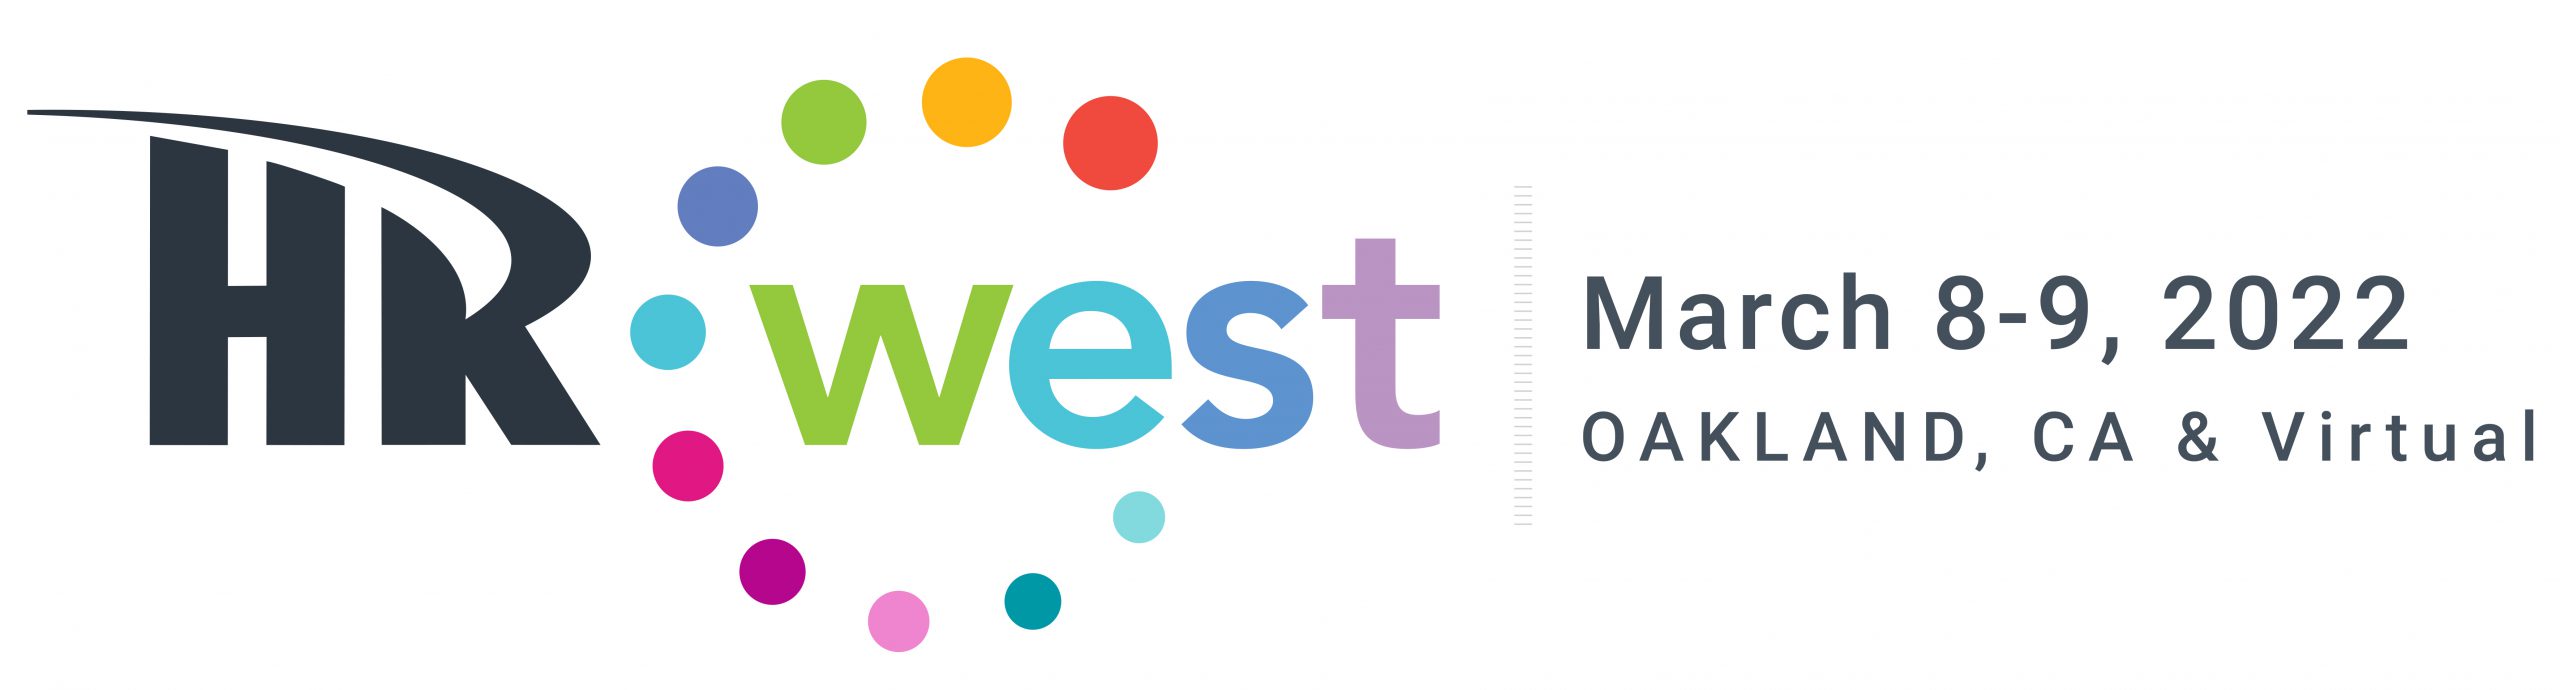 Announces HR West 2022 Conference as both an InPerson